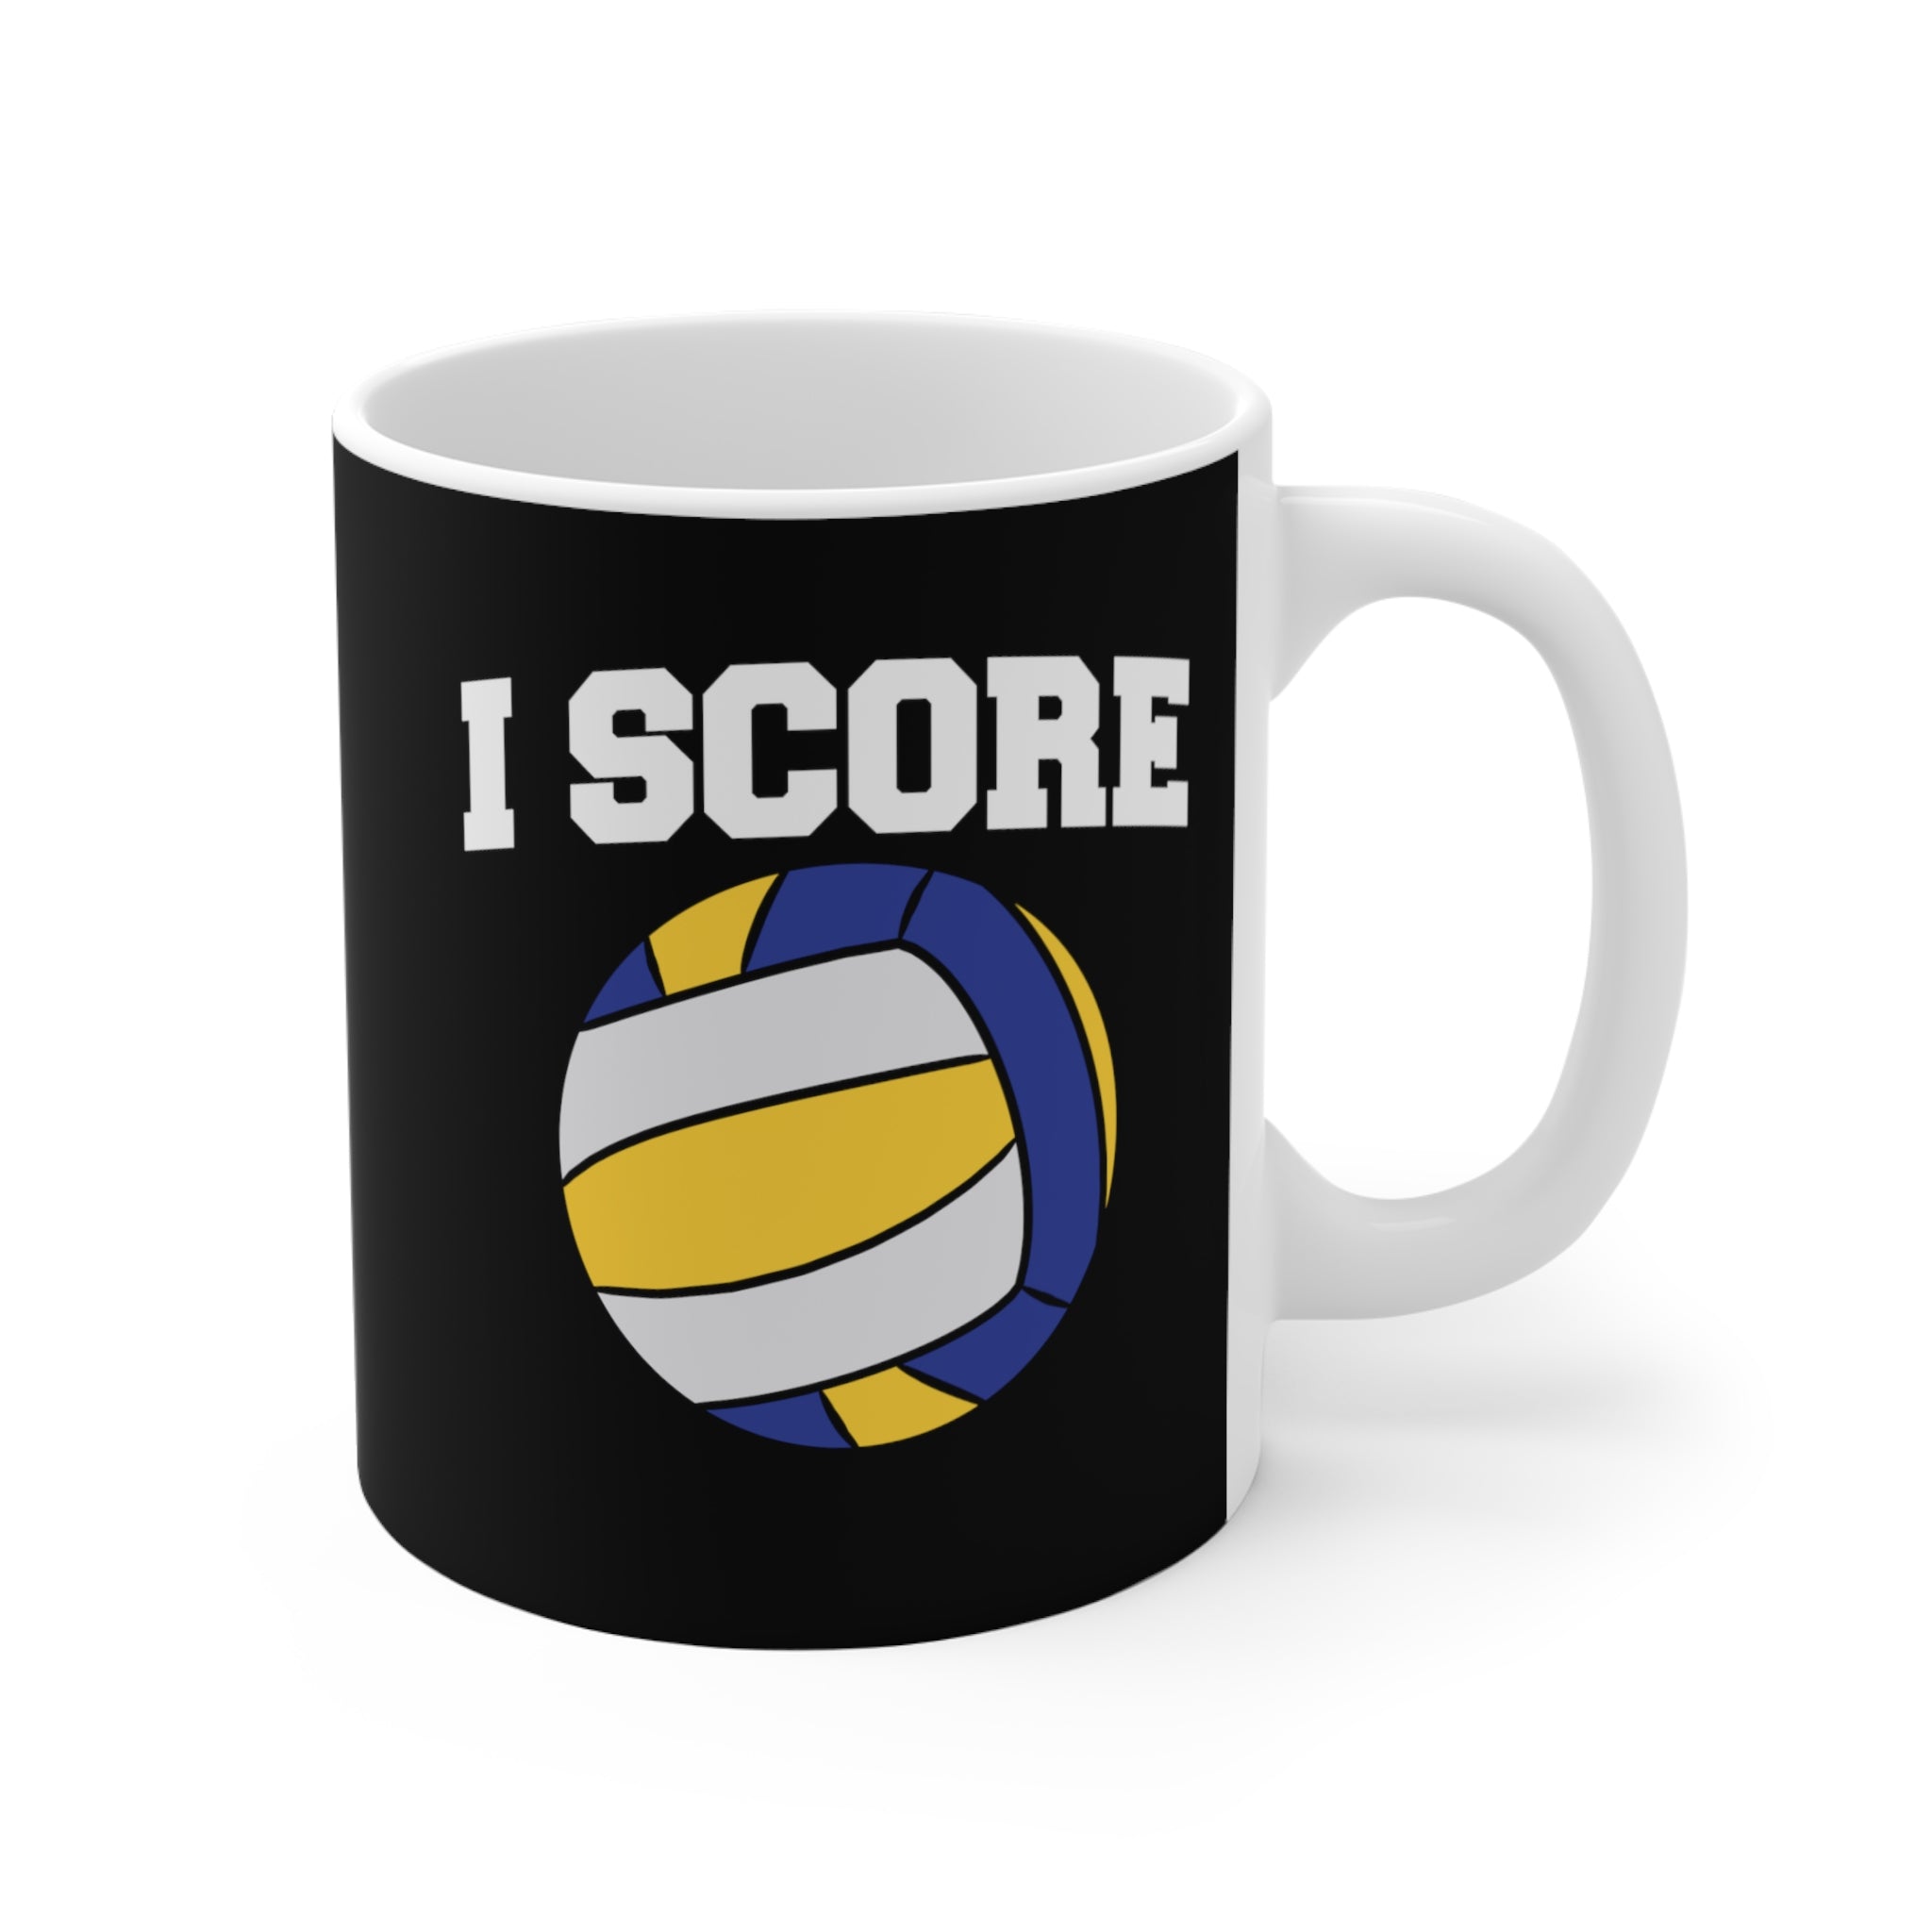 I SCORE Volleyball Coffee Cups